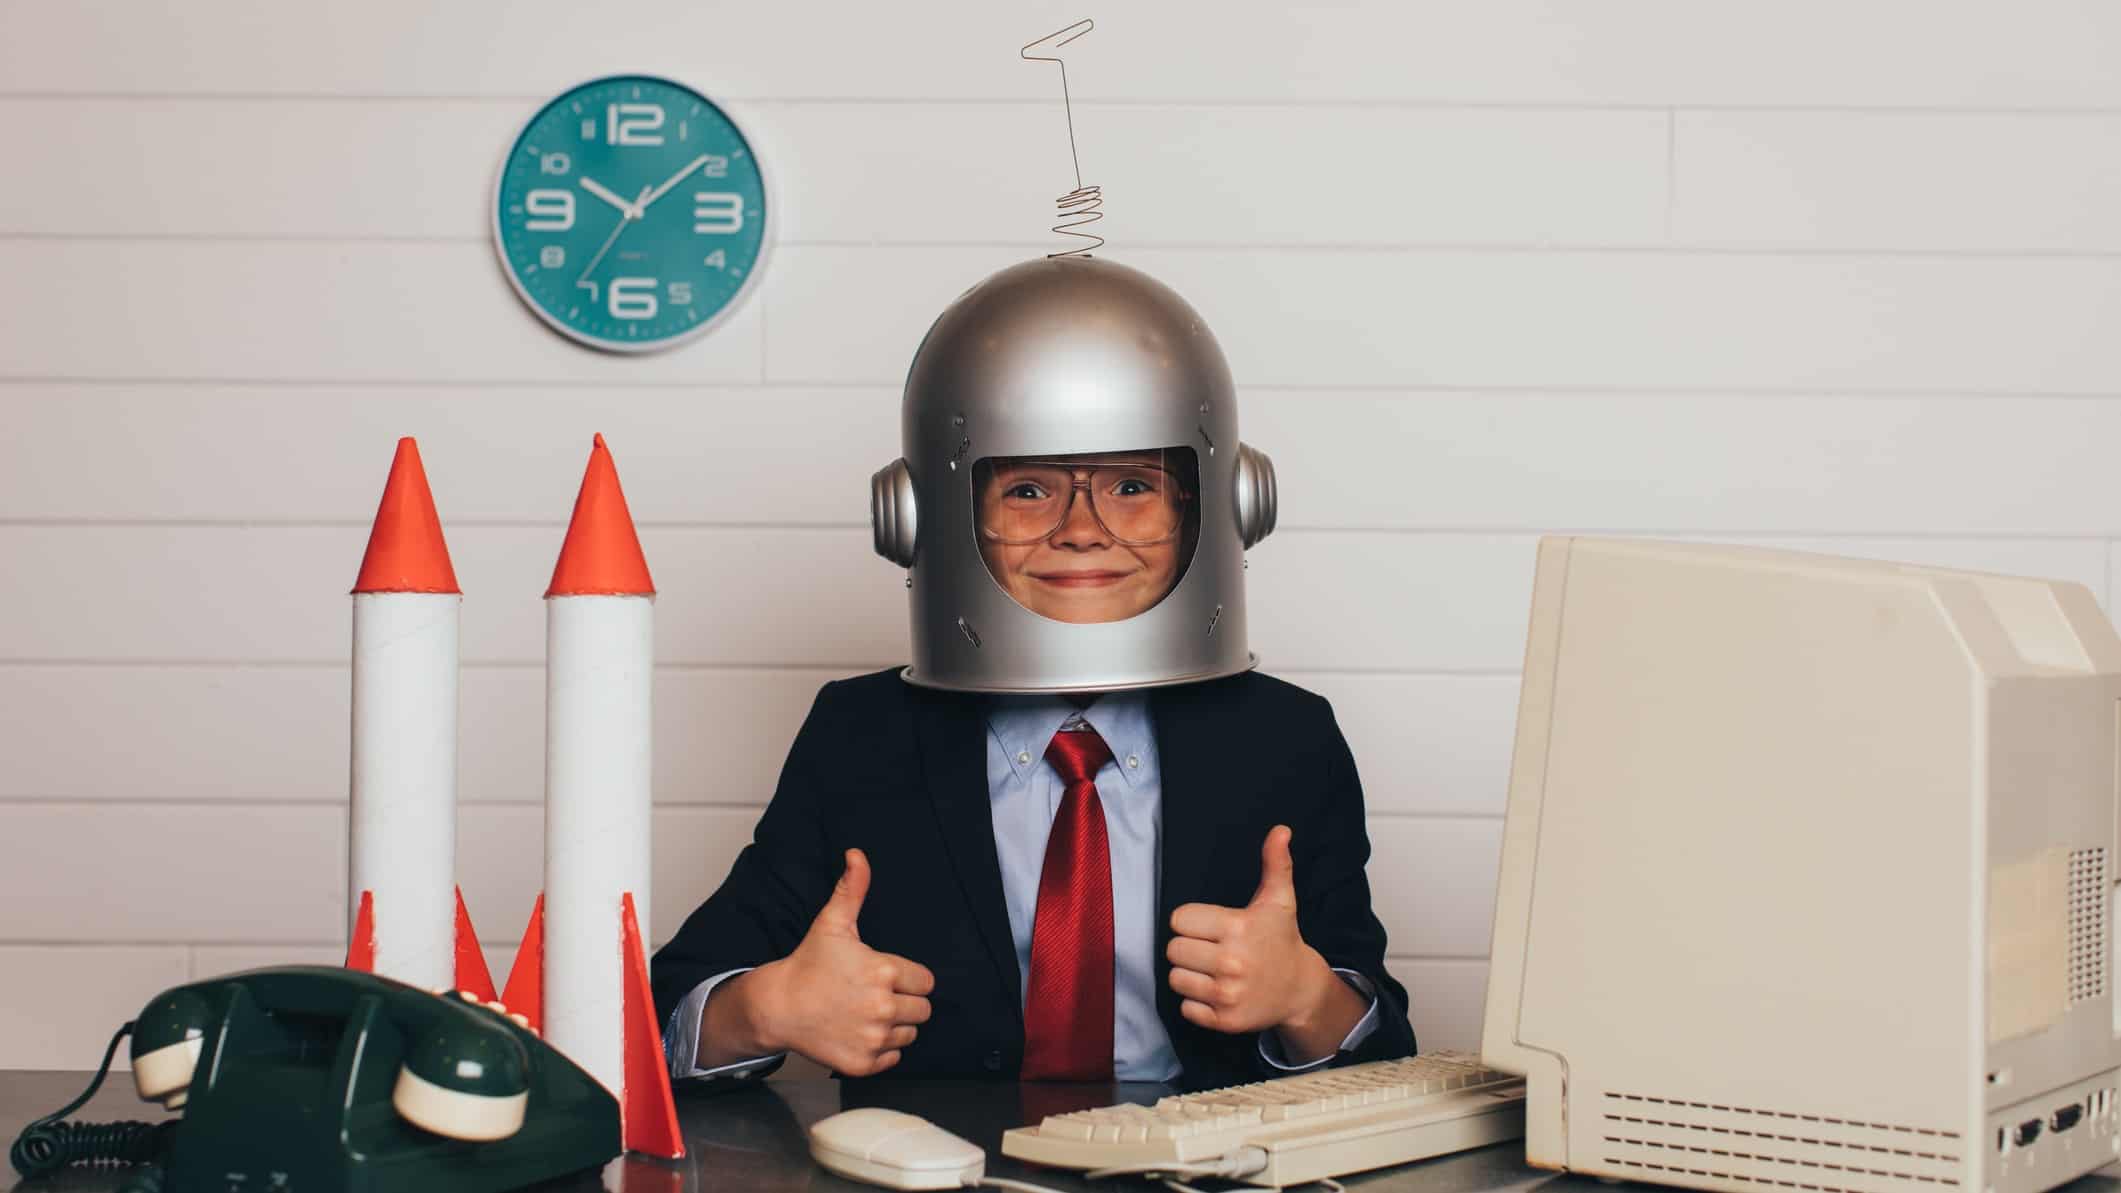 Child wearing a space helmet and sitting with thumbs up next to two toy rockets on a desk with a computer, keyboard and mouse.